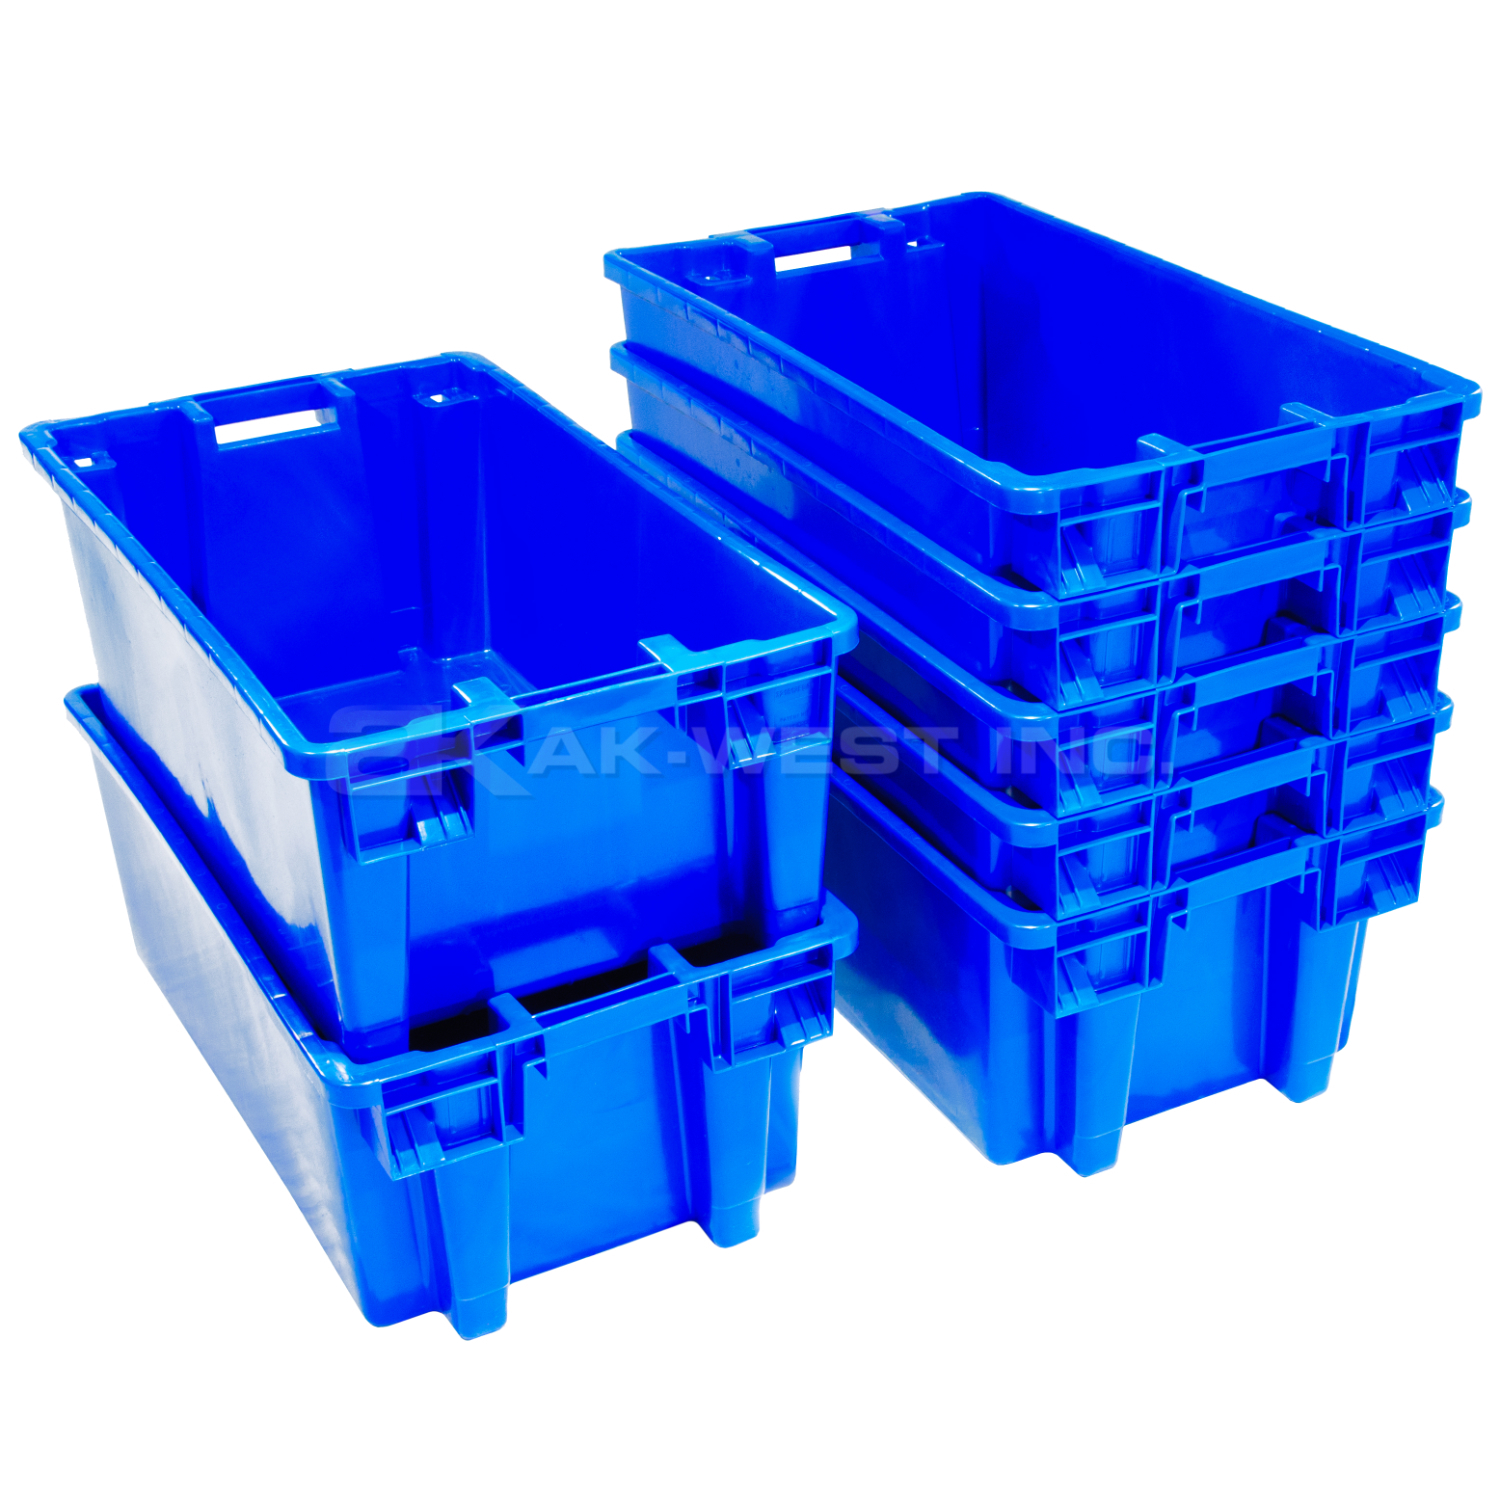 Blue, 31" x 18" x 12", Heavy Duty Stack and Nest Container